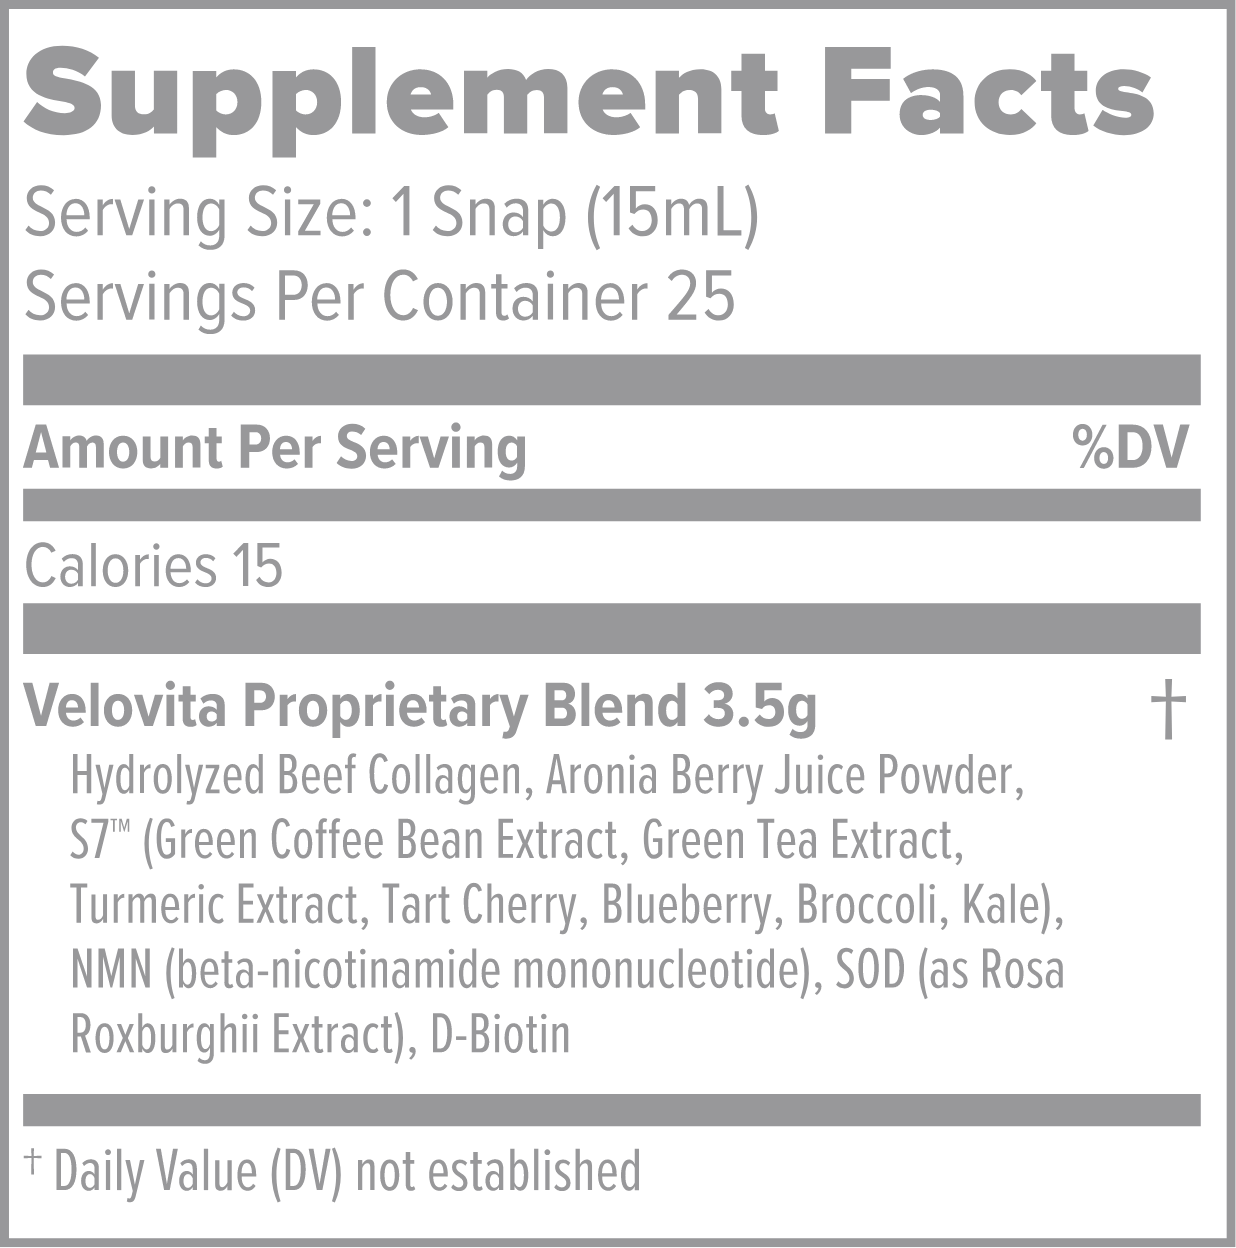 Product Supplement facts table